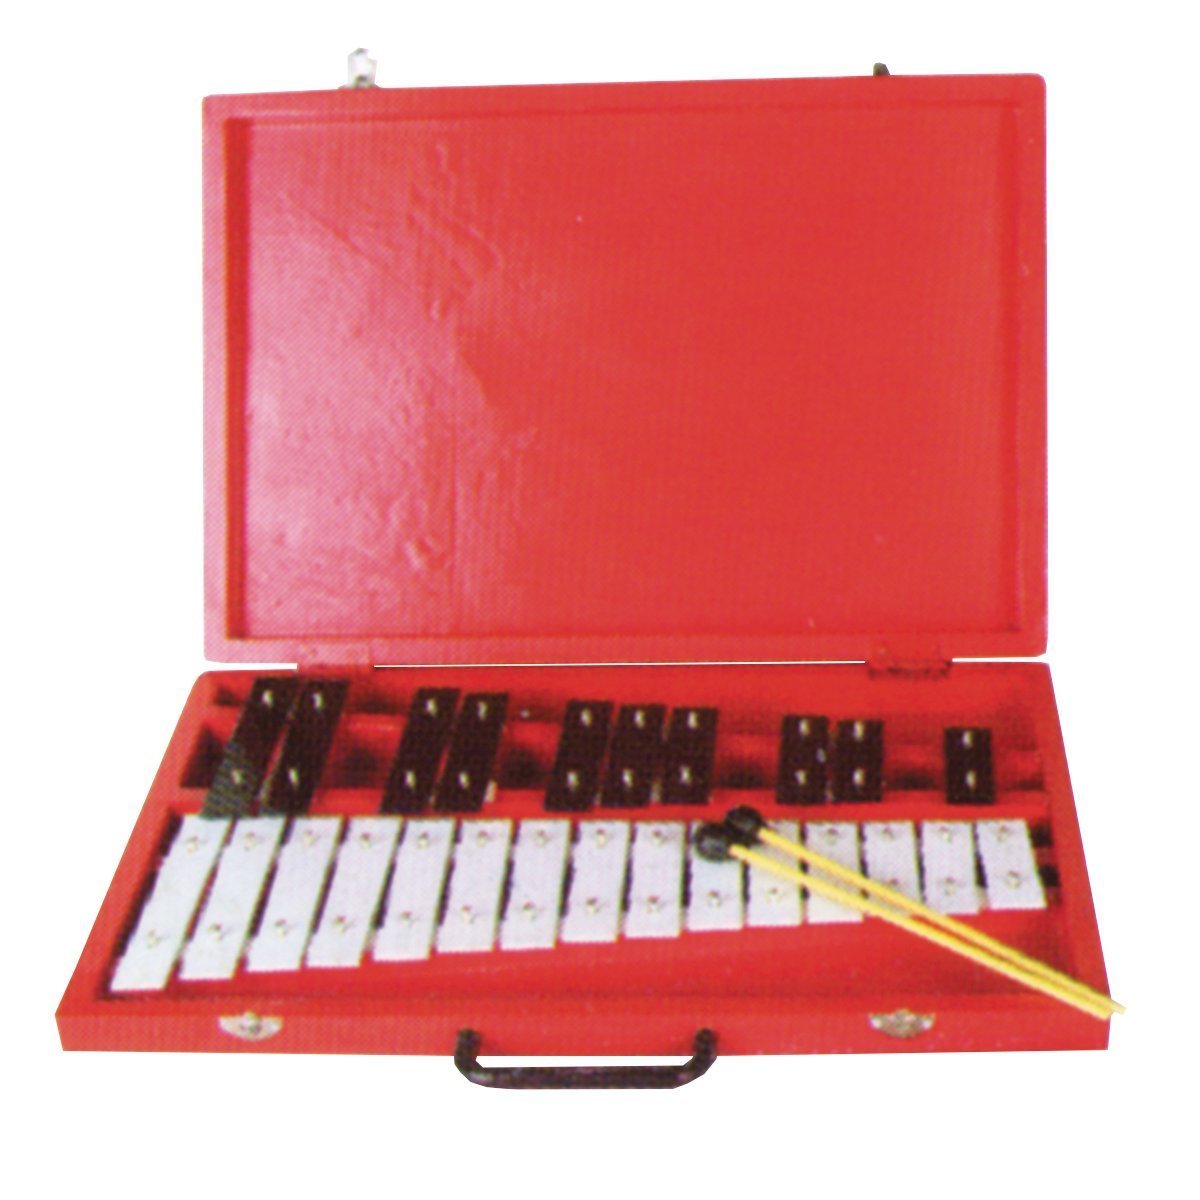 Drumfire Metallophone in Wooden Carry Case (Red)